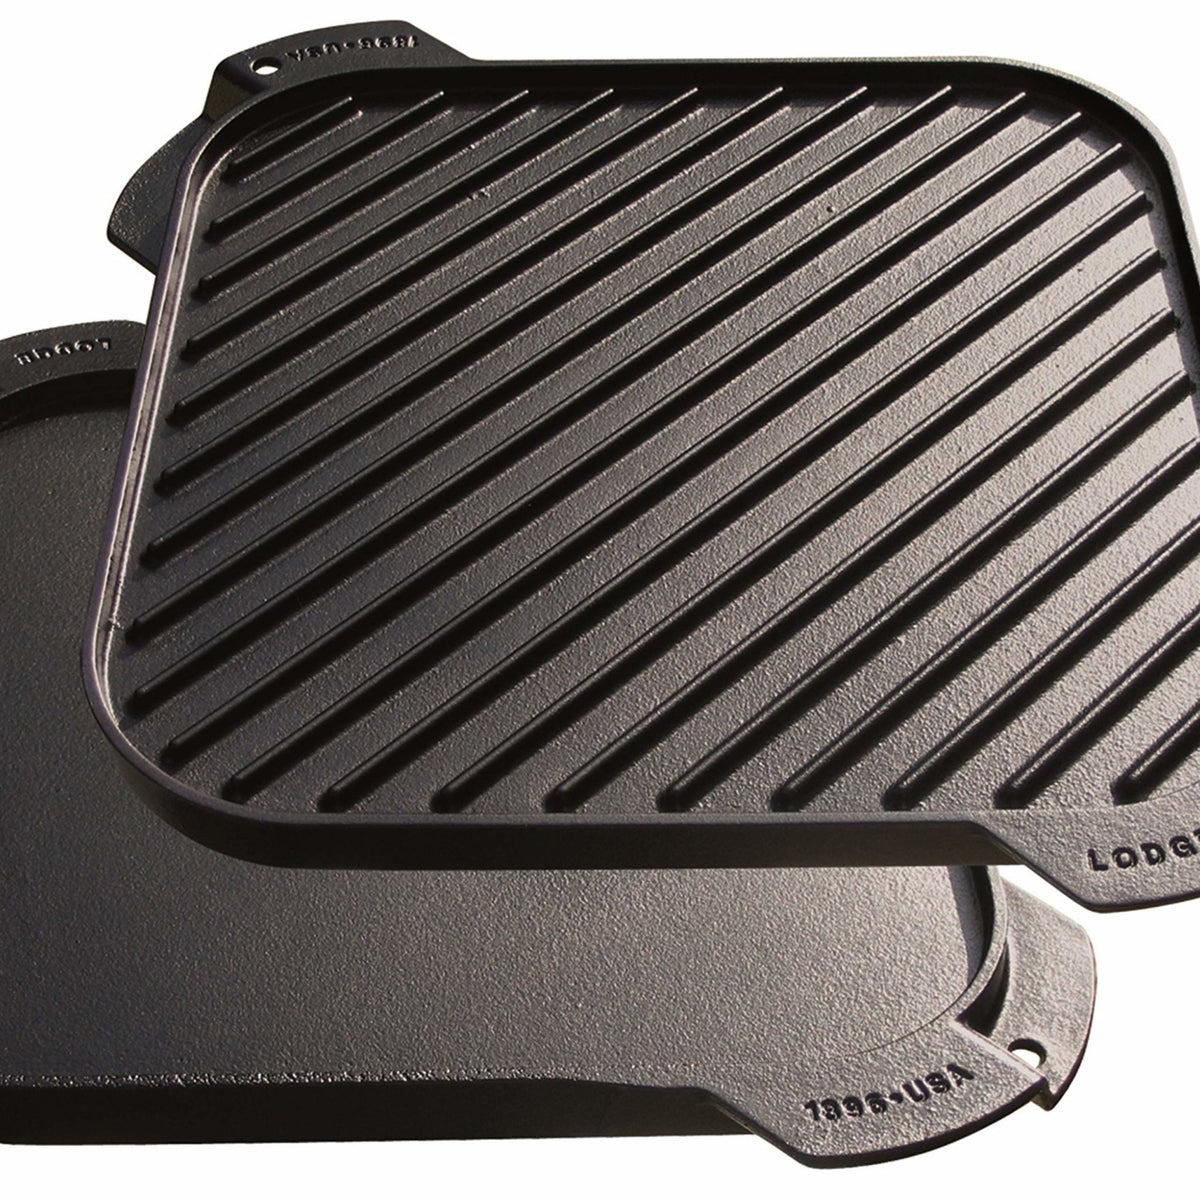 Commercial Chef Cast Iron 10.5 Round Griddle Black